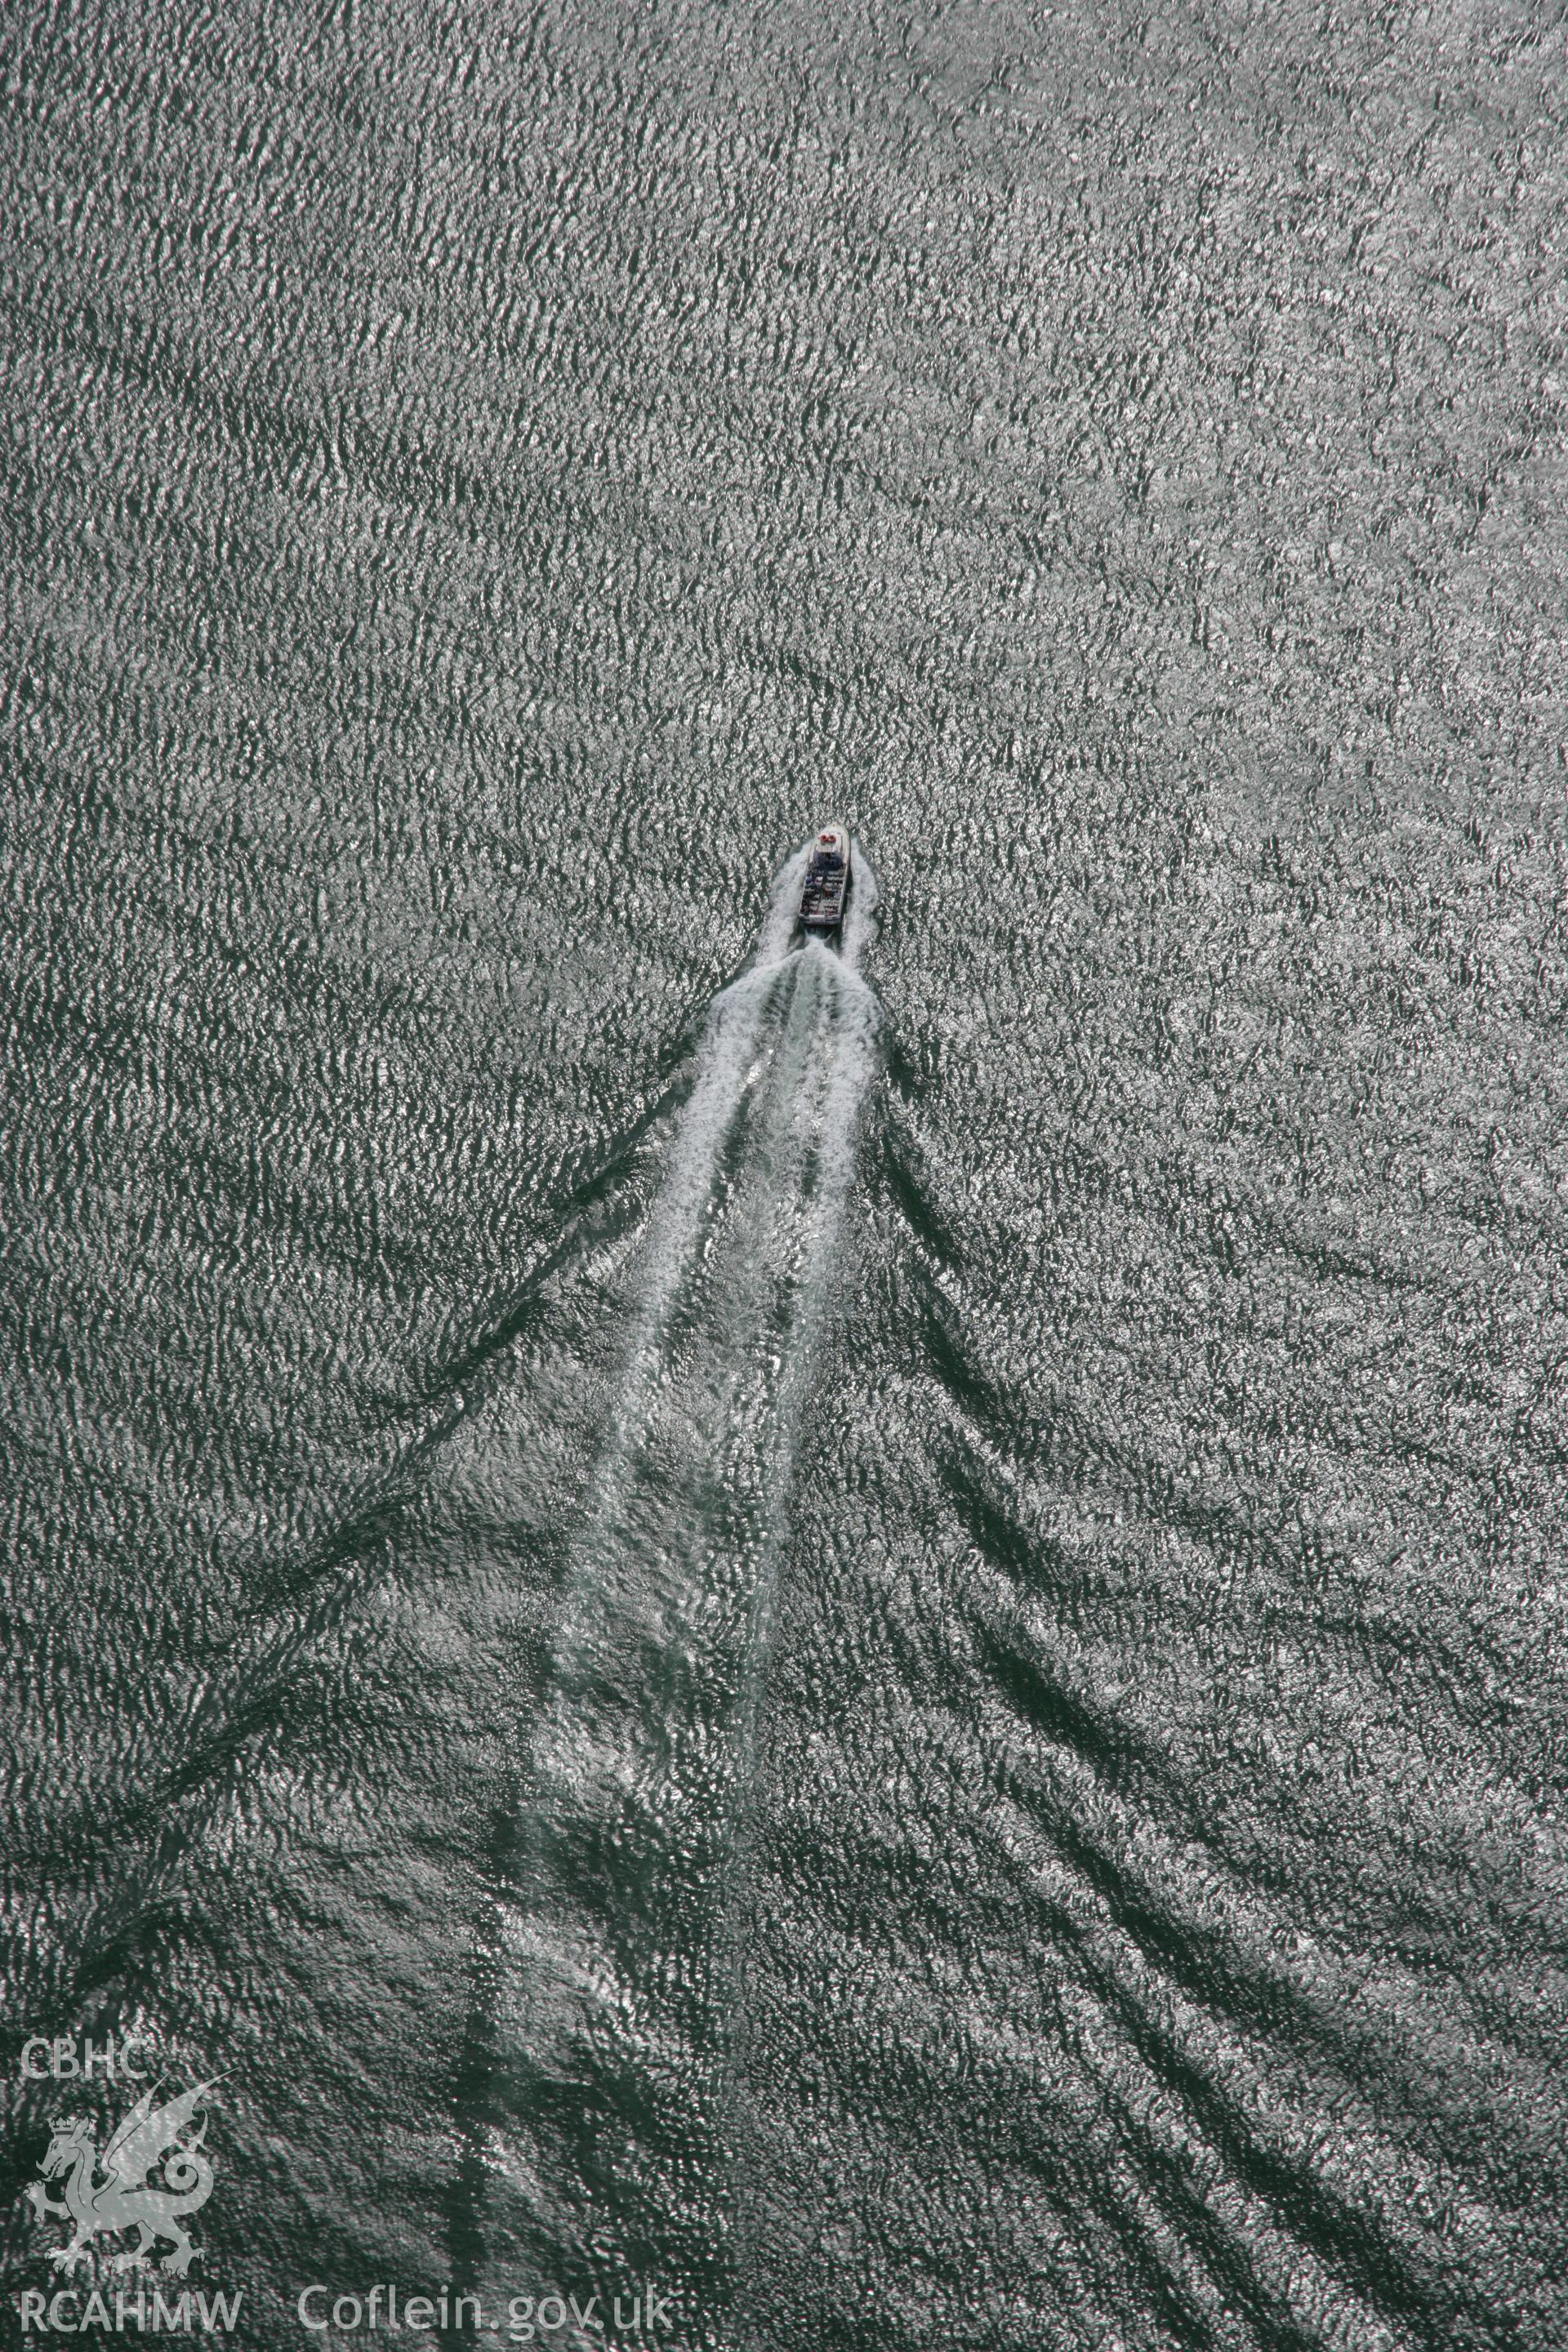 RCAHMW colour oblique aerial photograph of pleasure boat near Penmon Priory on Puffin Island (or Priestholm). Taken on 14 August 2006 by Toby Driver